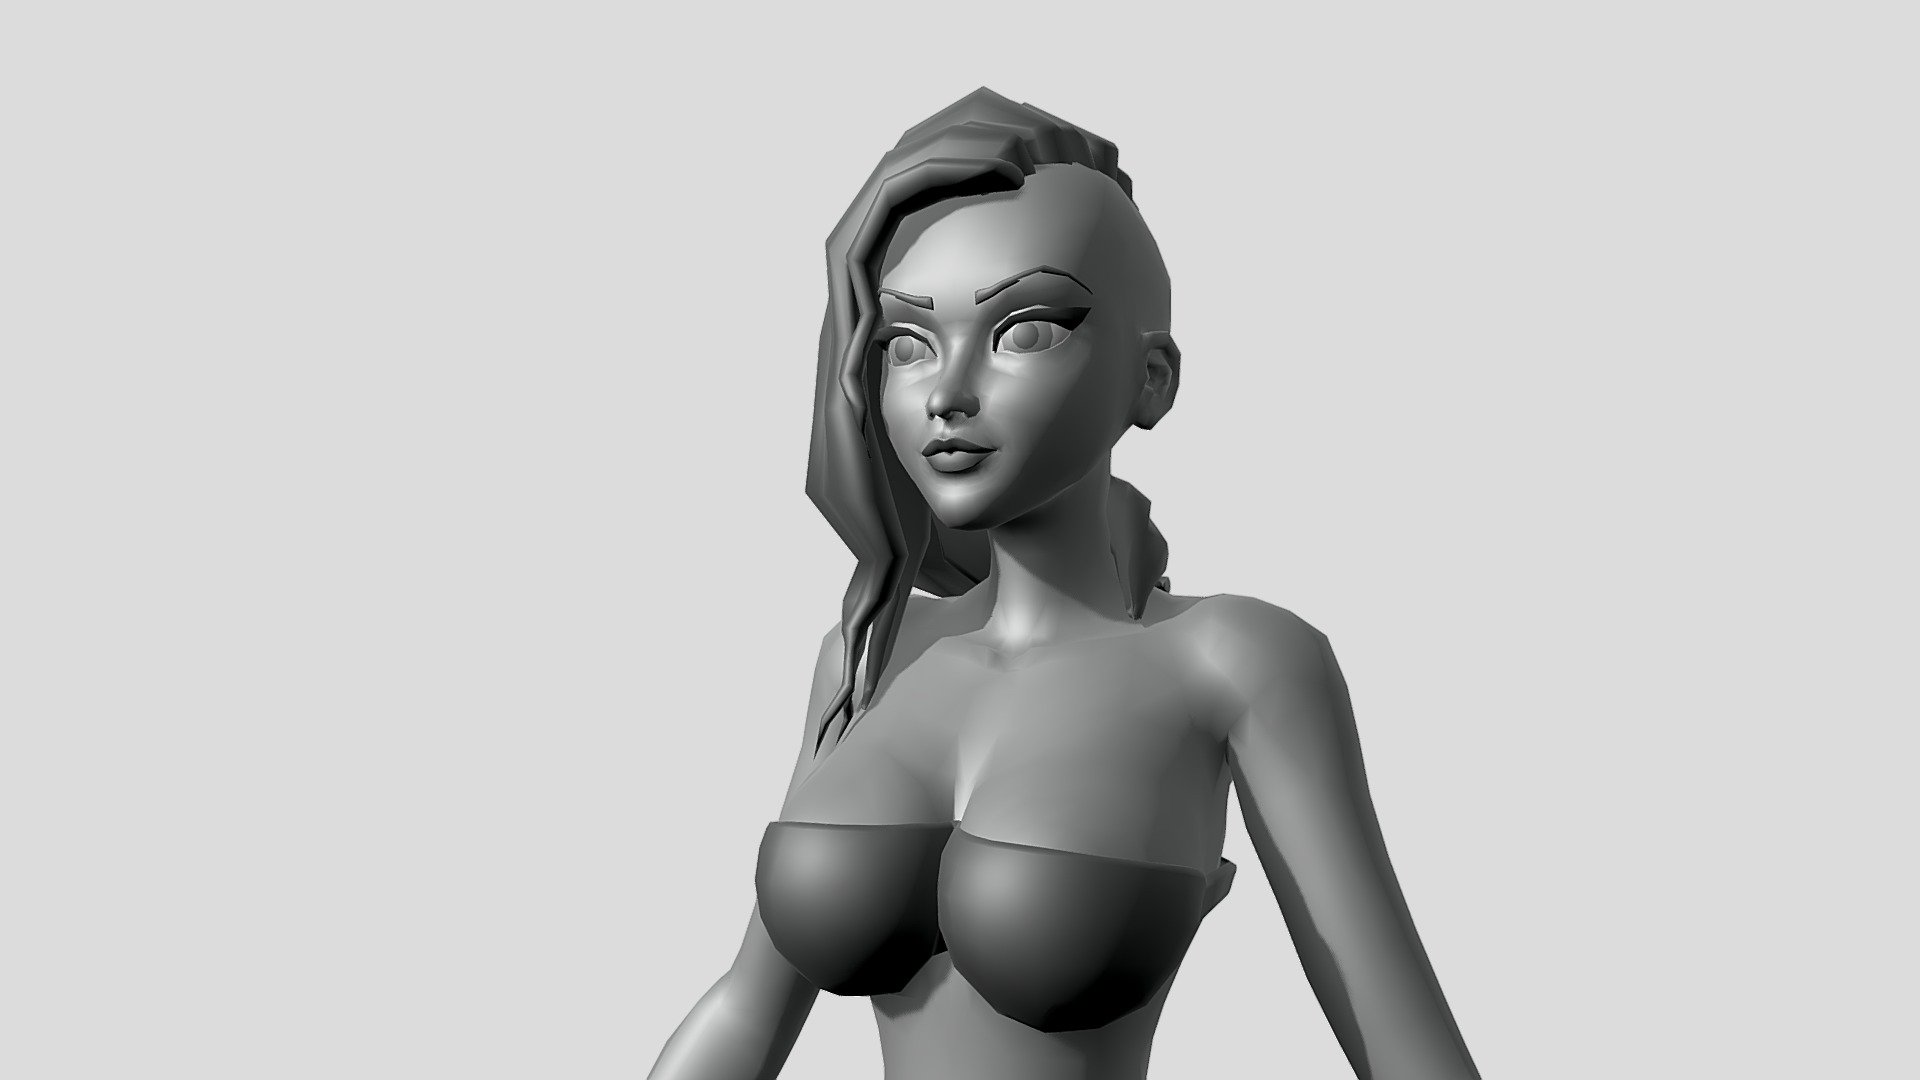 Visit the link below for the model:


https://www.artstation.com/a/28263417
Female BaseMesh  was made in Maya with proper topology and looping with Unwraped UV and no over lapping.

Ready for sculpting and texturing&hellip;

File format:





Obj




Fbx




Maya file




Blender file



Inside the product:





clean topology




Multiple Udim 




unwrapped Uvs for texturing




no overlapping UVs




proper naming and grouping




no unwanted shaders and history.



You May also like:


👉https://skfb.ly/oNM79 👈



👉https://skfb.ly/oOZIr 👈


You May also like:


👉 https://skfb.ly/oMLZT 👈
 - Female anatomy basemesh - Buy Royalty Free 3D model by Tashi59 (@tsering) 3d model